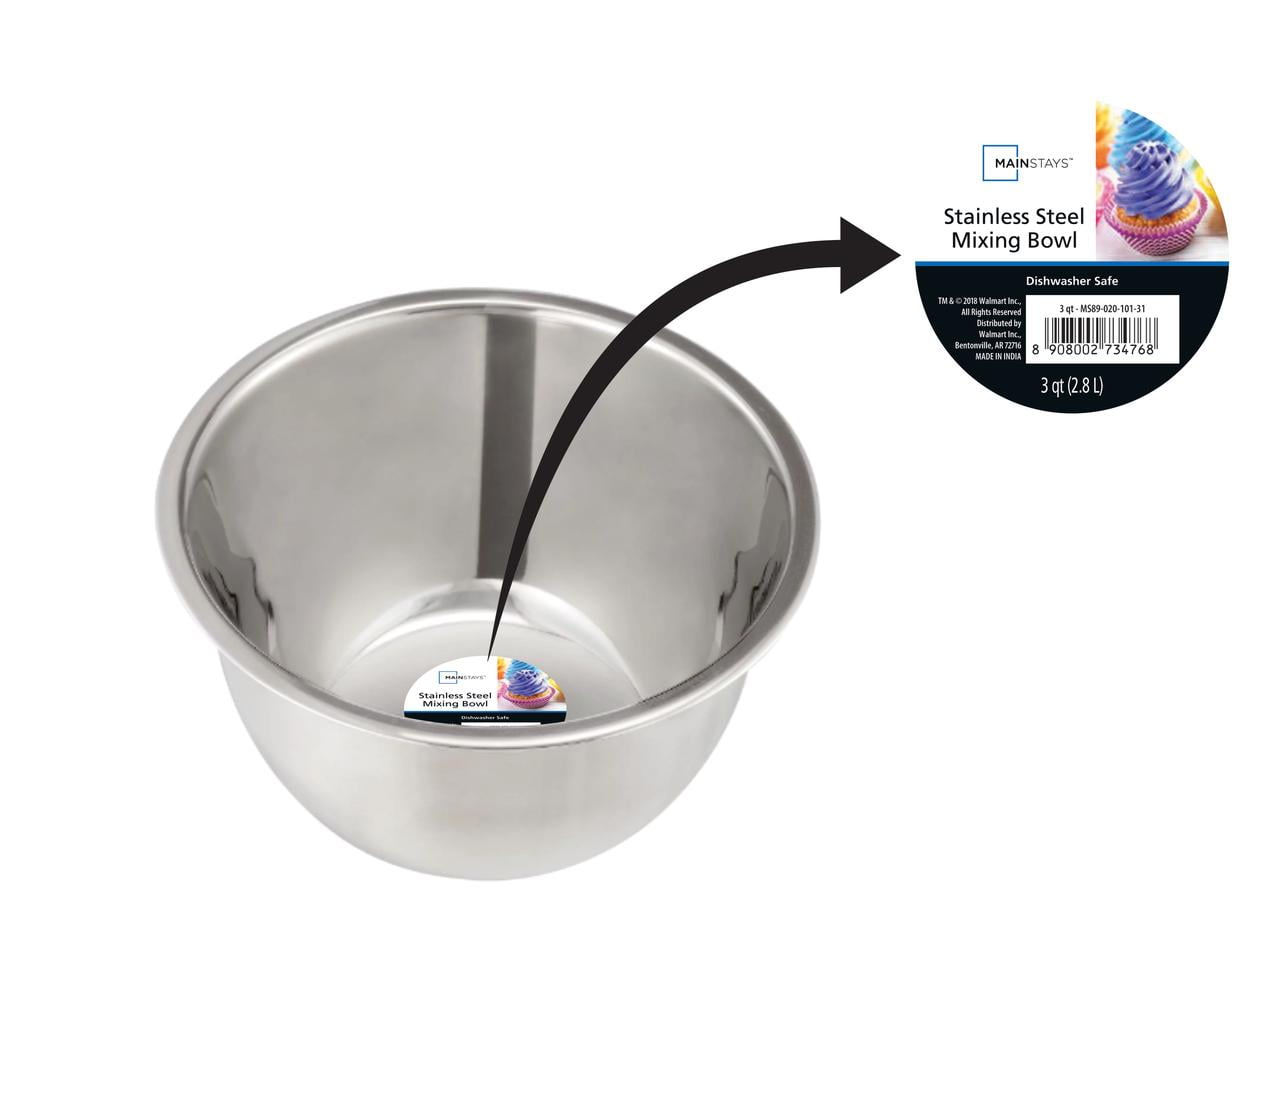 Stainless Steel 3-Quart Bowl + Reviews